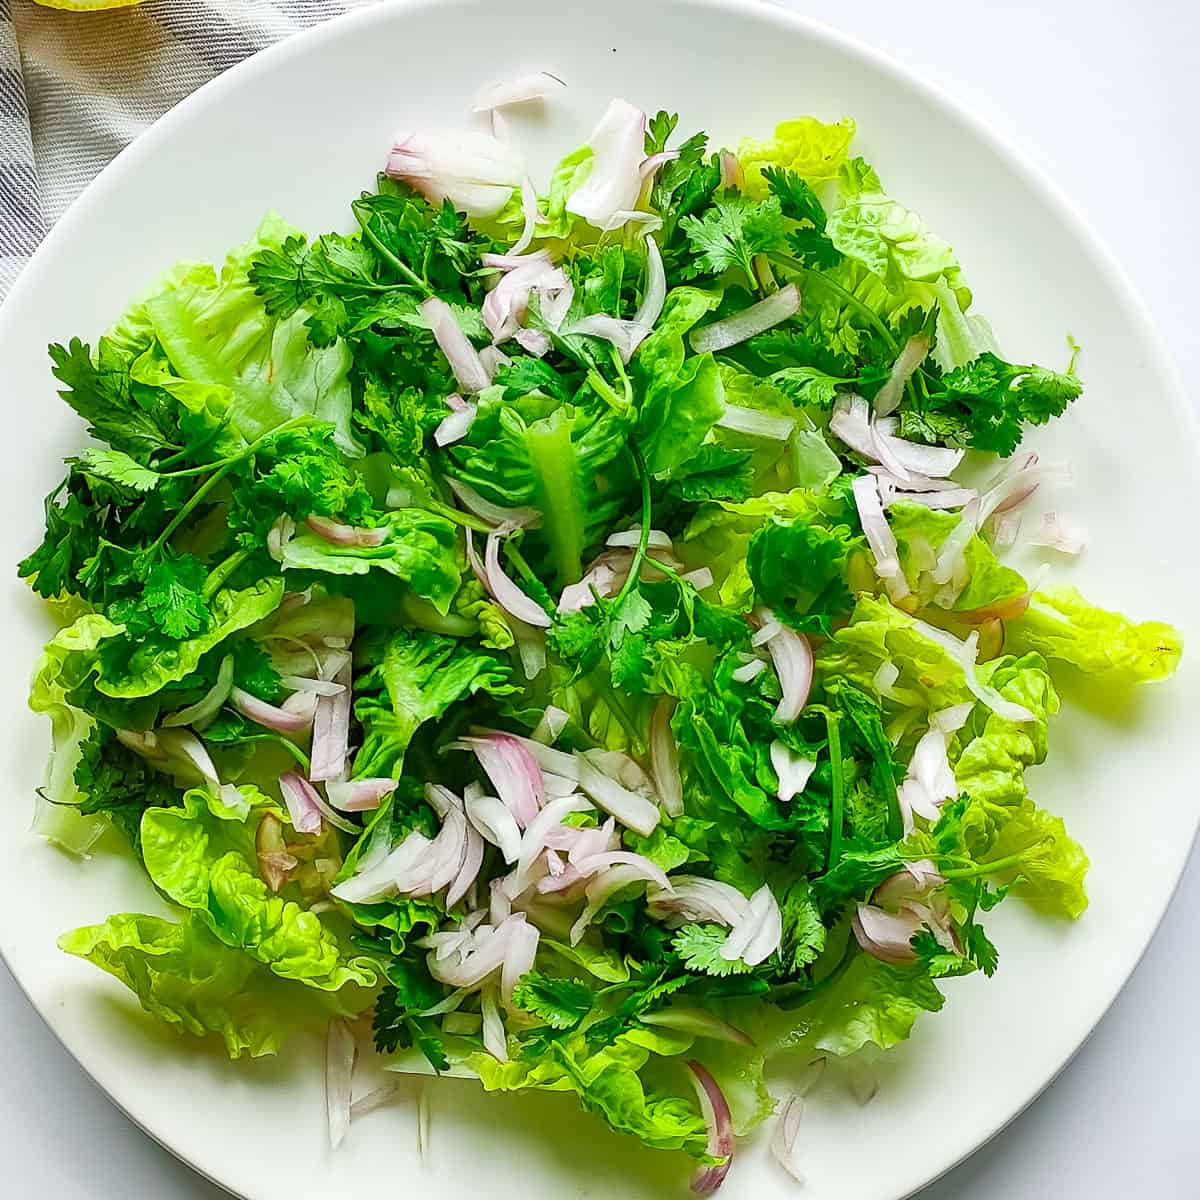 Lettuce and onions on a white plate.